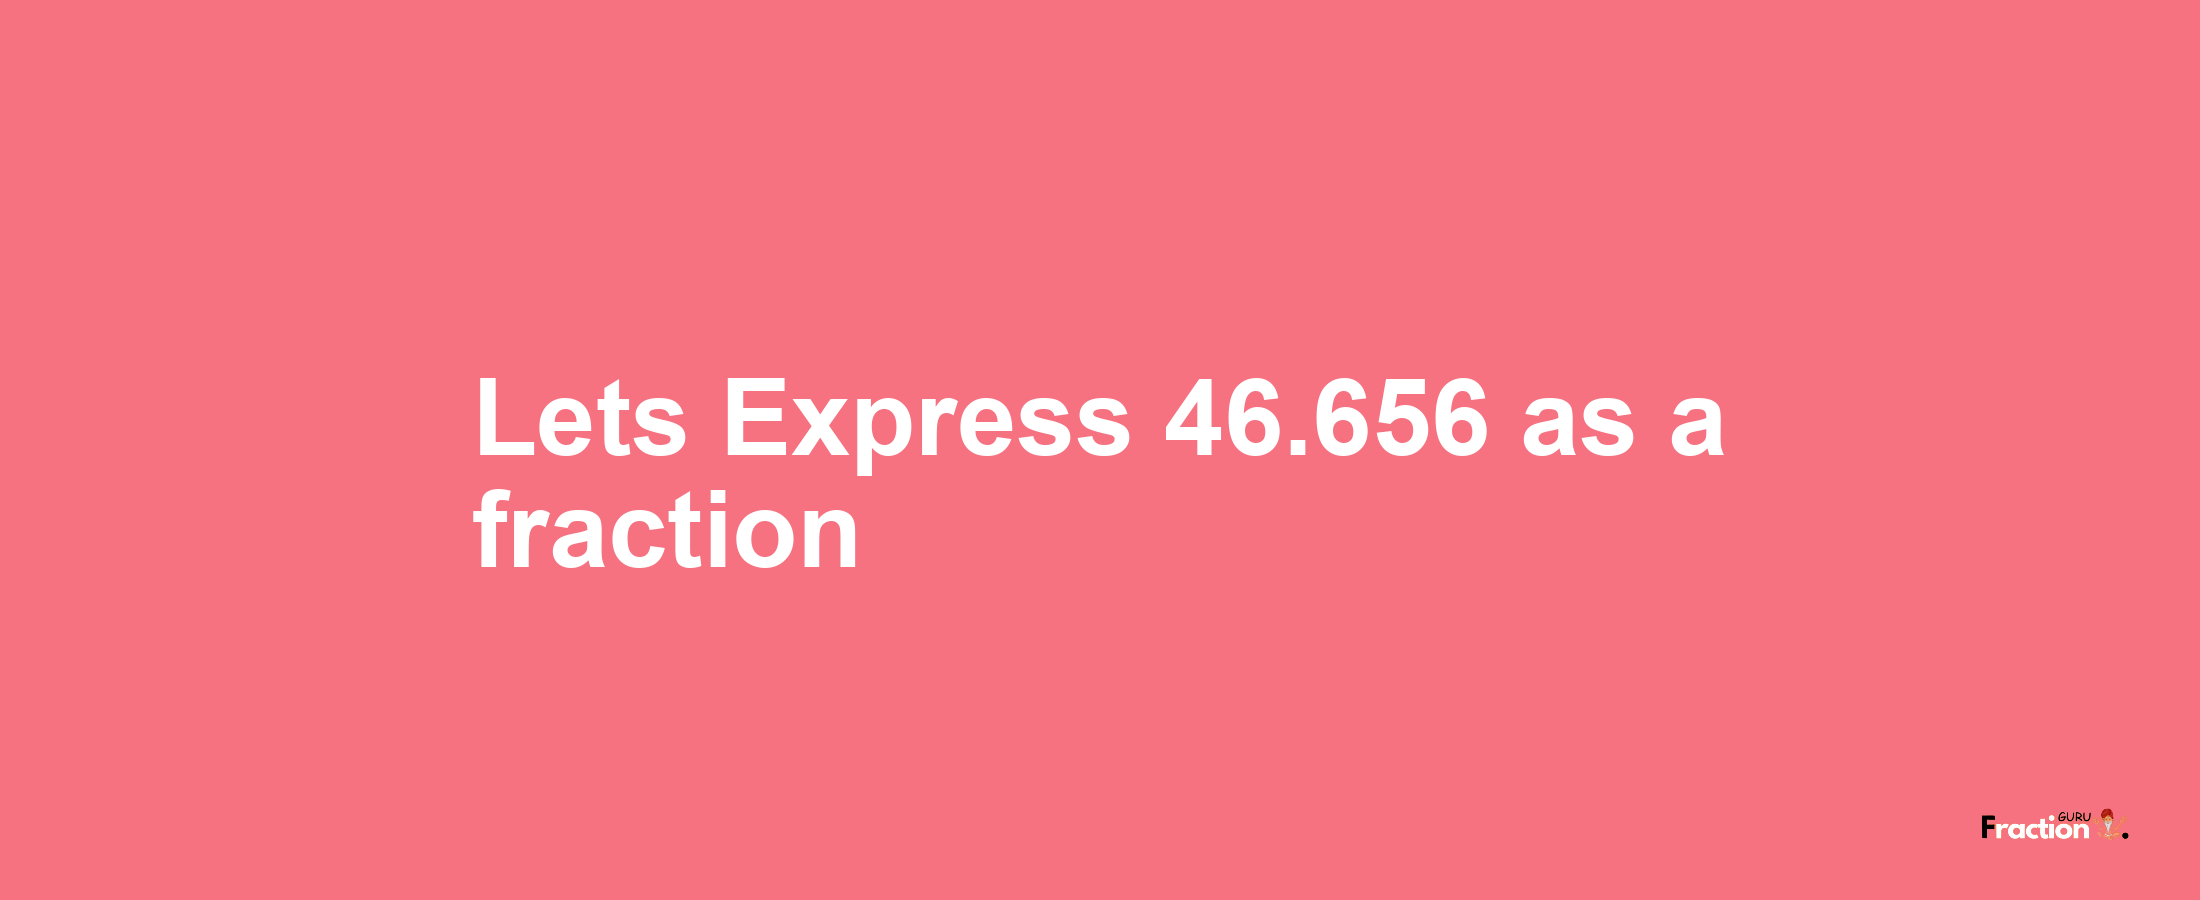 Lets Express 46.656 as afraction